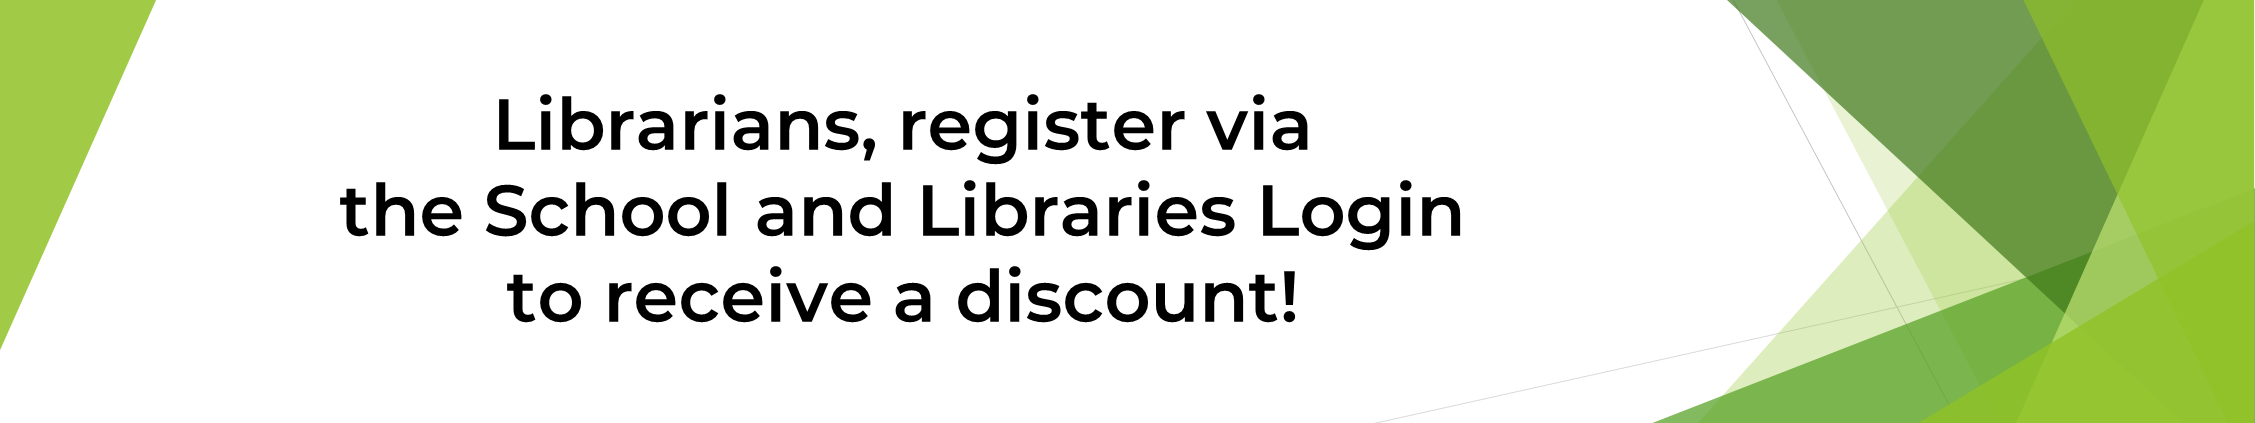 Librarians, register via the School and Libraries Login to receive a discount!